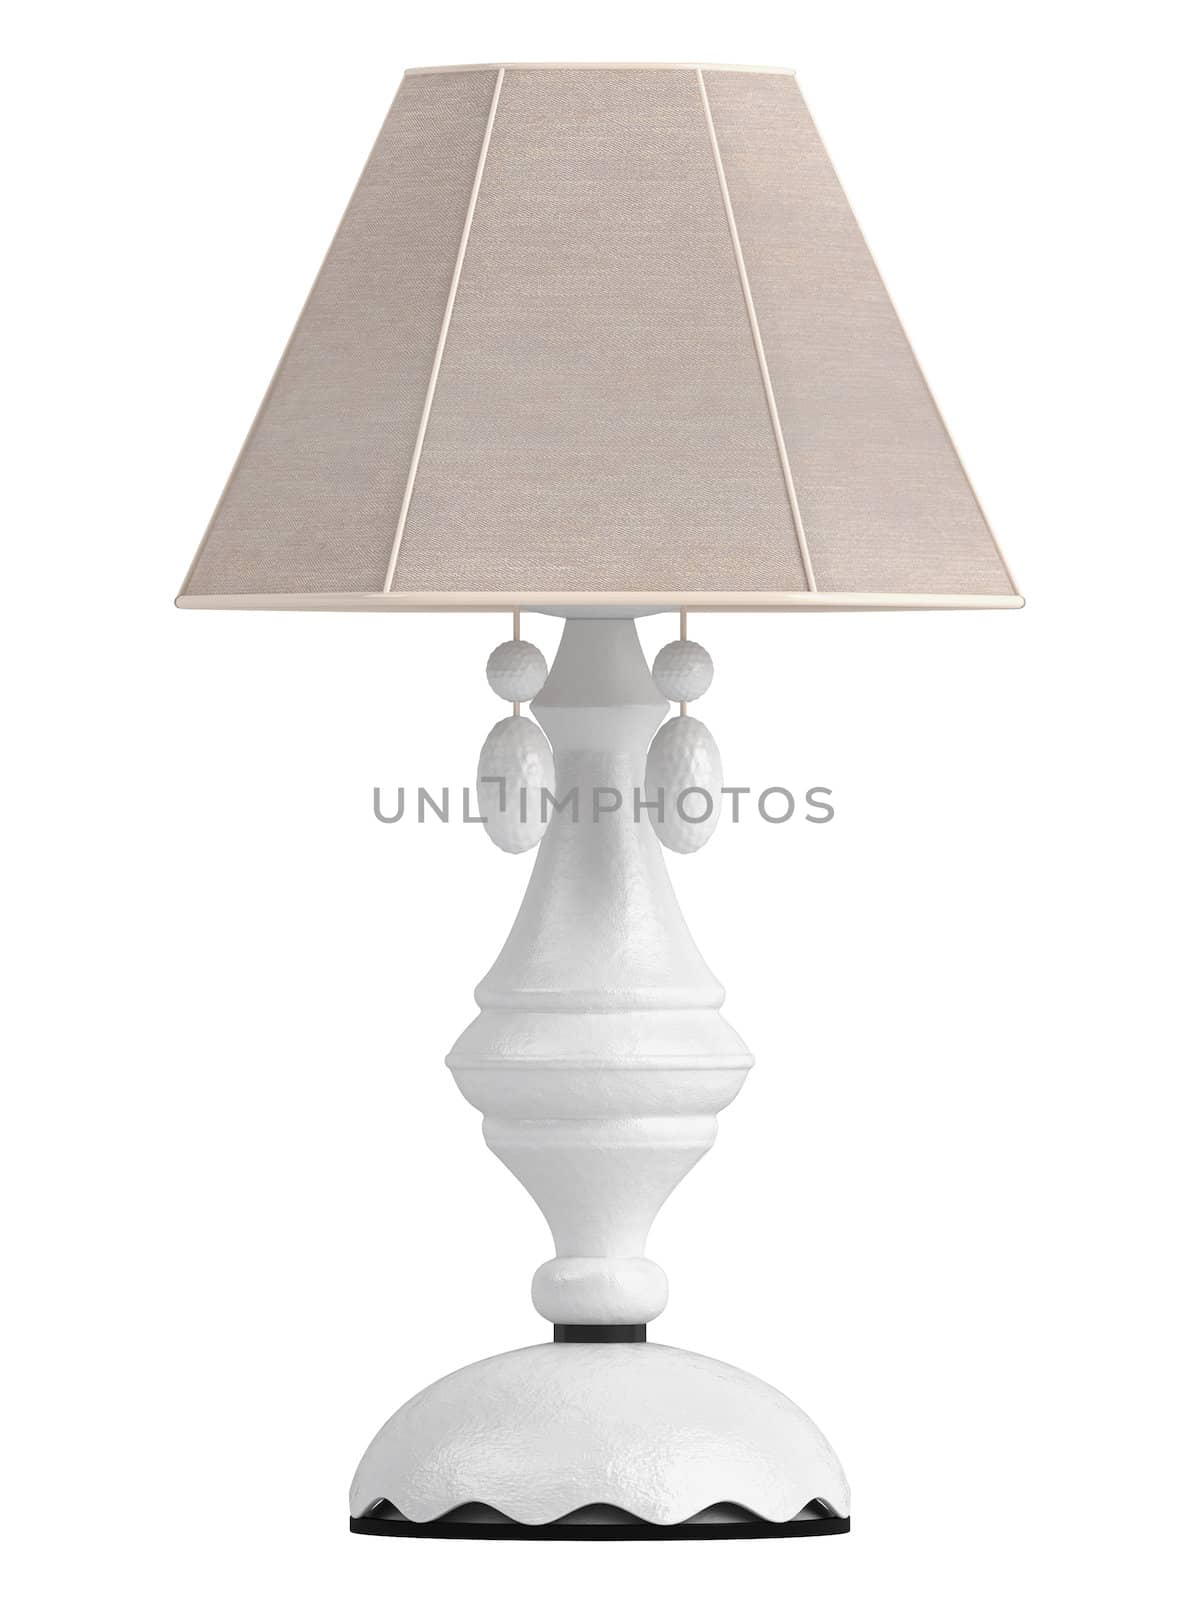 White lamp with hexagonal shade for the interior decoration of your living room isolated on white